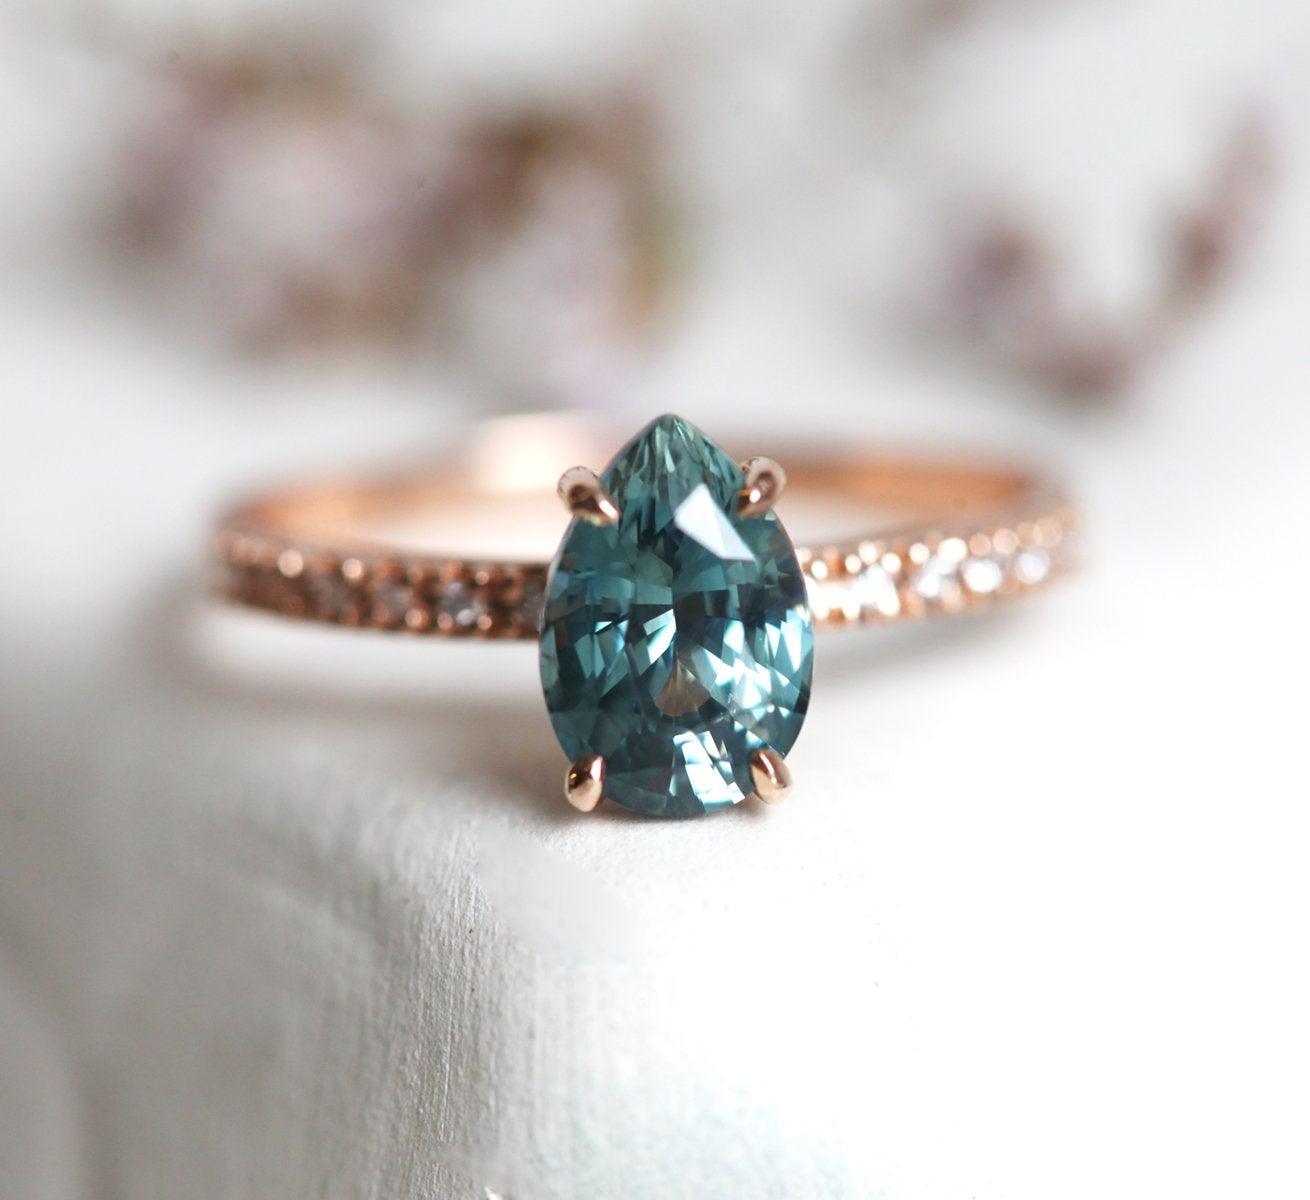 Pear-shaped teal sapphire ring with white side diamonds